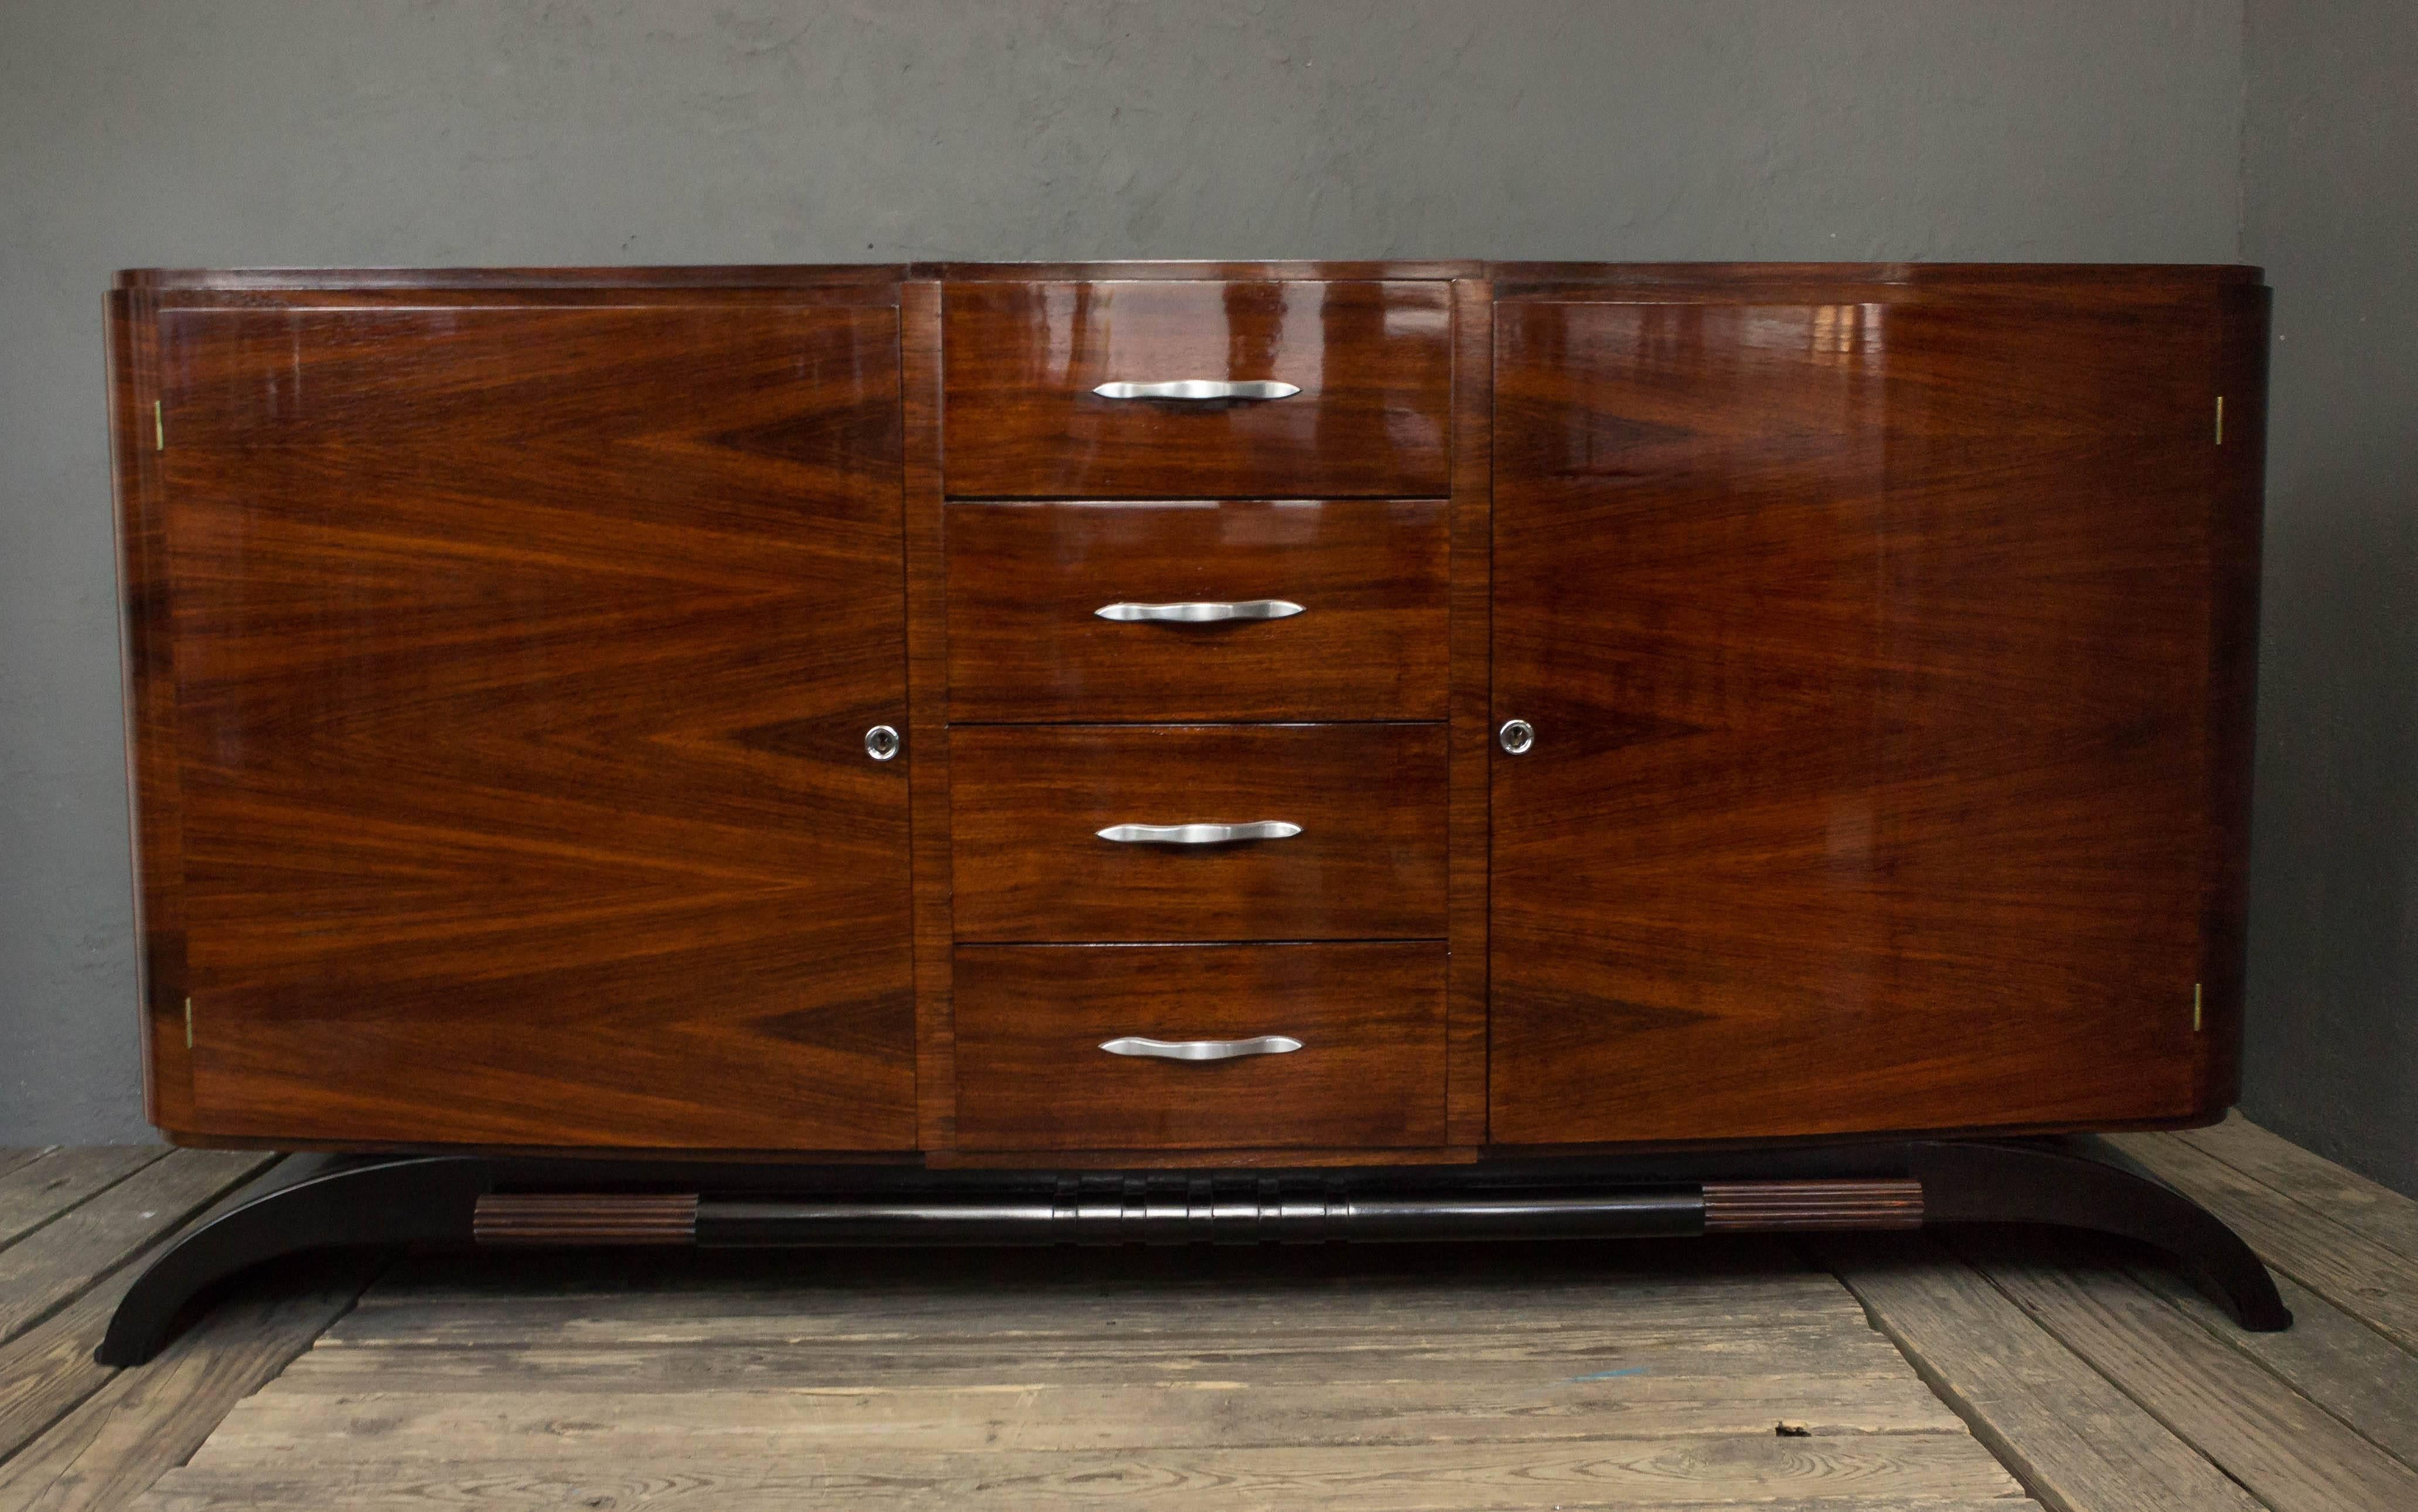 1940s French sideboard with rosewood veneers. Two curved doors reveal 3 adjustable shelves and the sideboard has a center column of drawers with brass hardware. This piece has recently been restored and is in excellent condition.